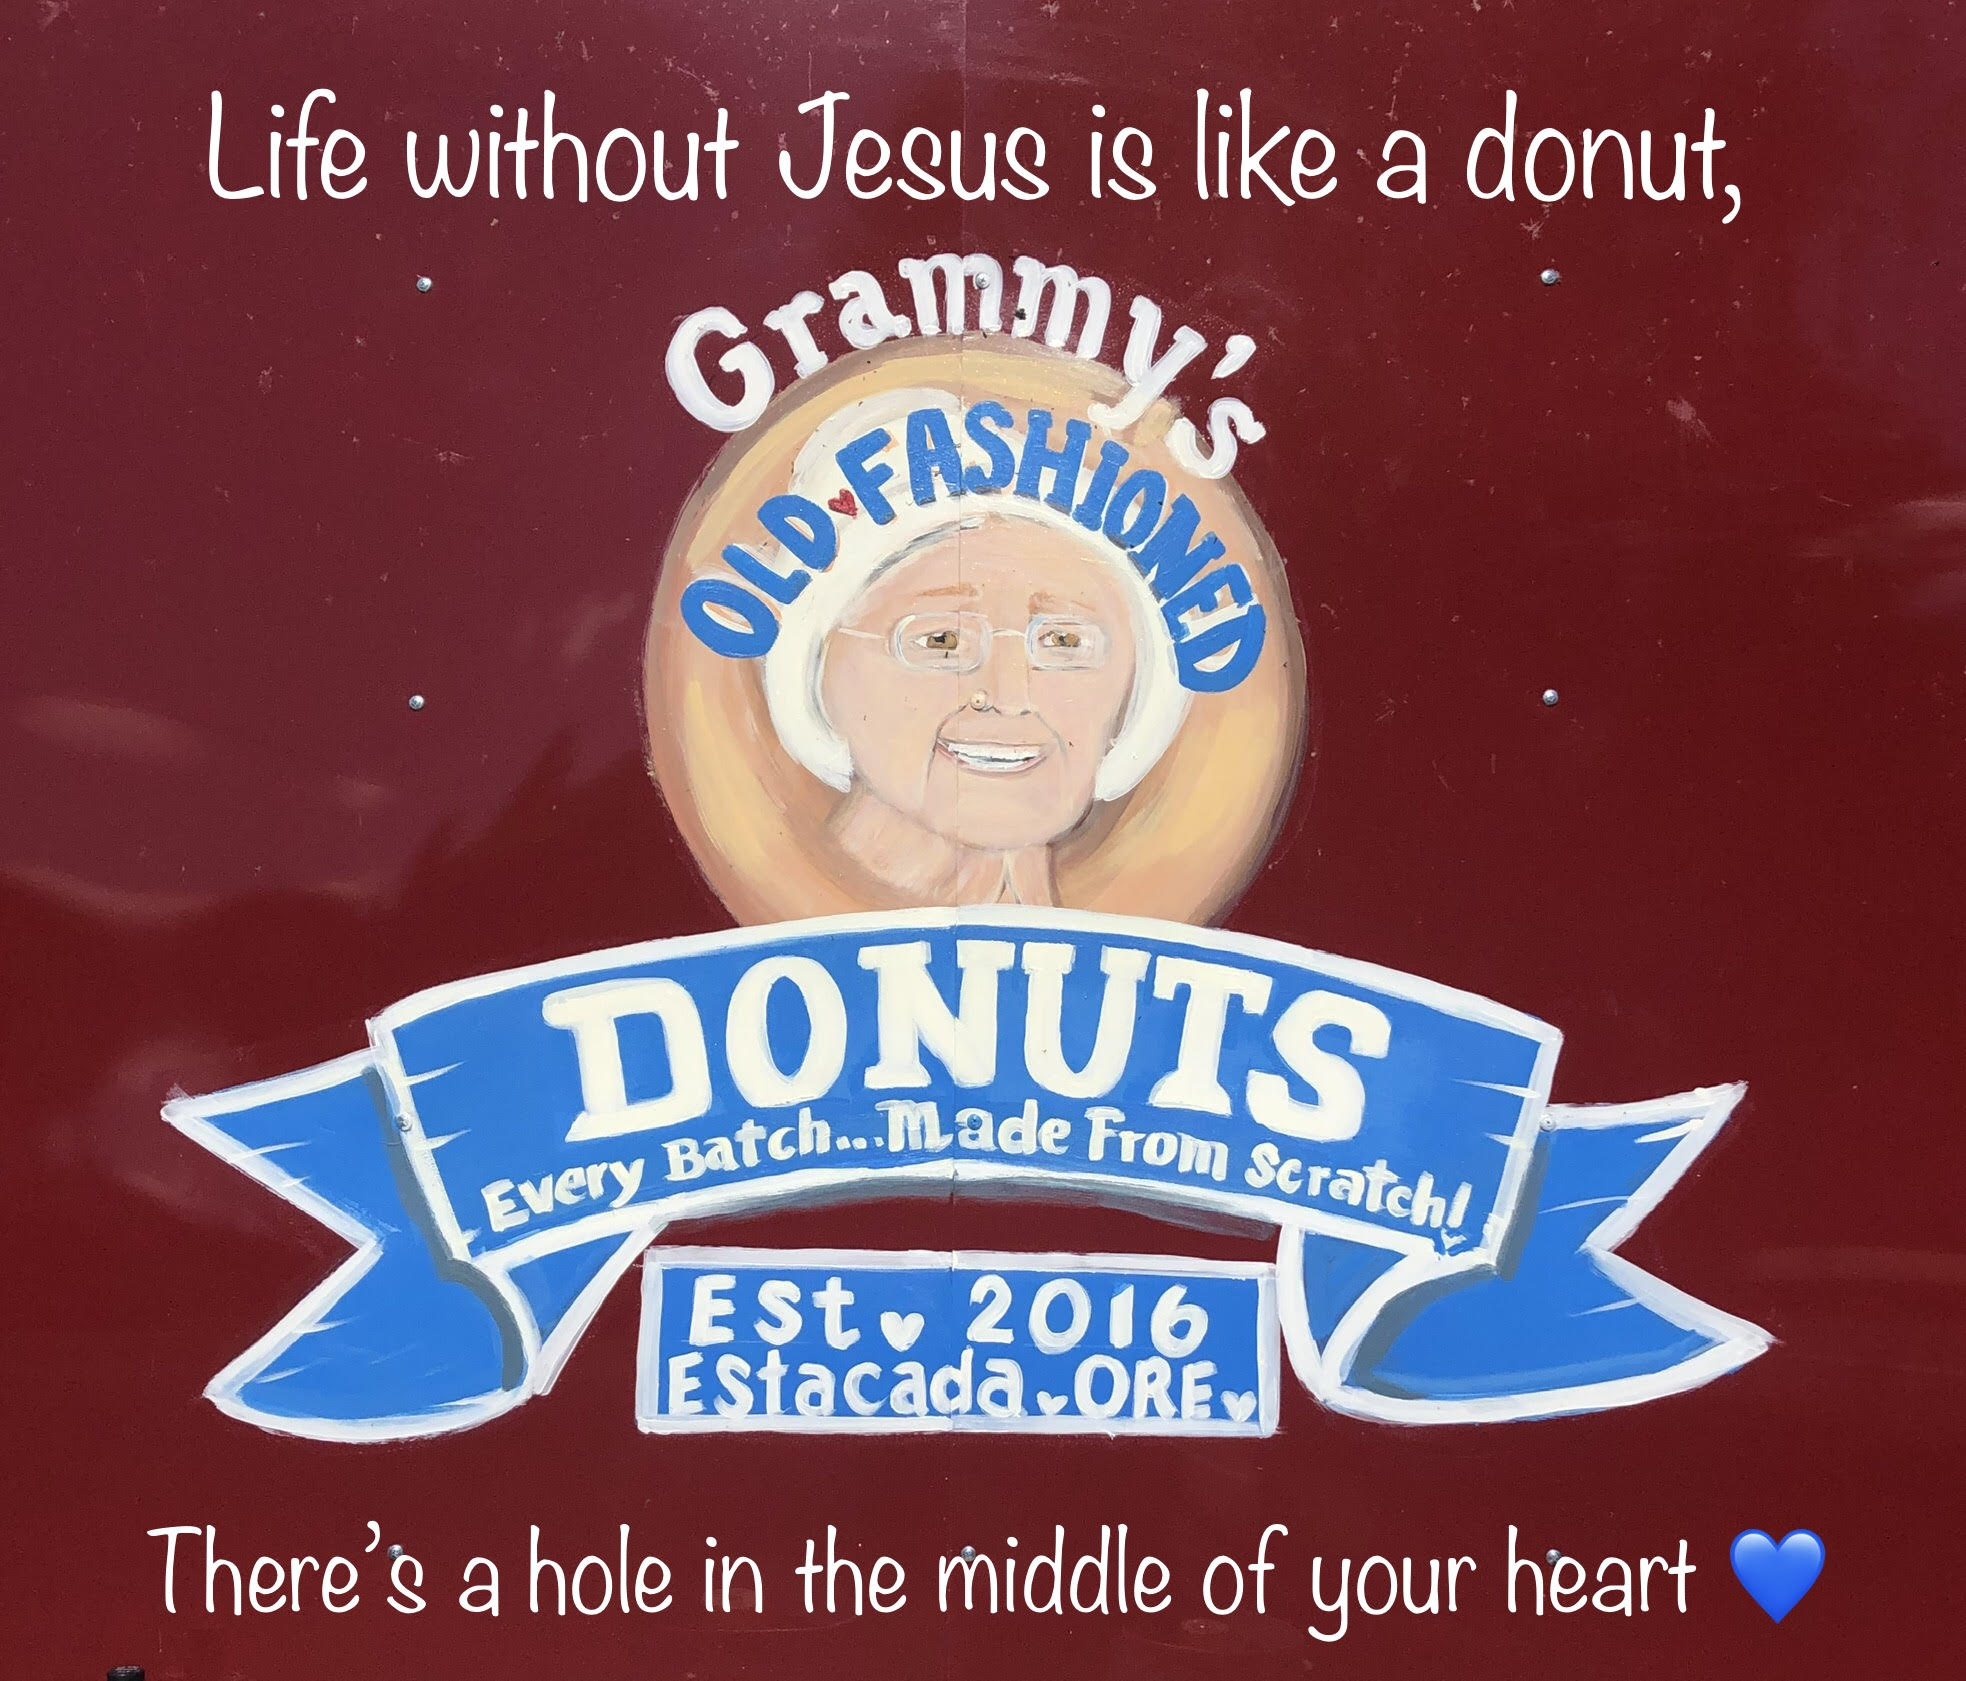 Grammy’s Old Fashioned Donuts (Estacada, OR)